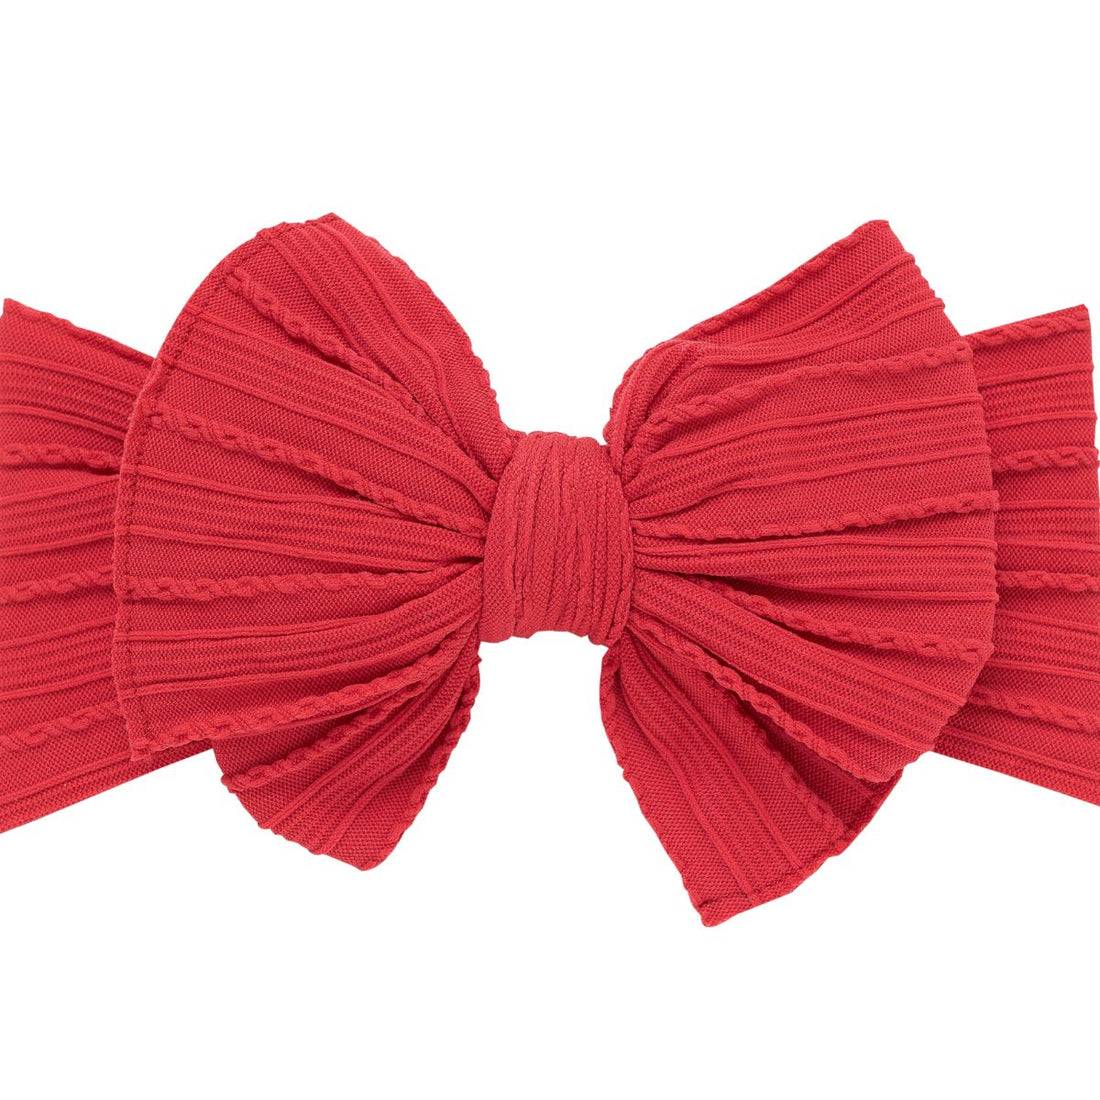 Jumbow Cable Knit Knot - Red